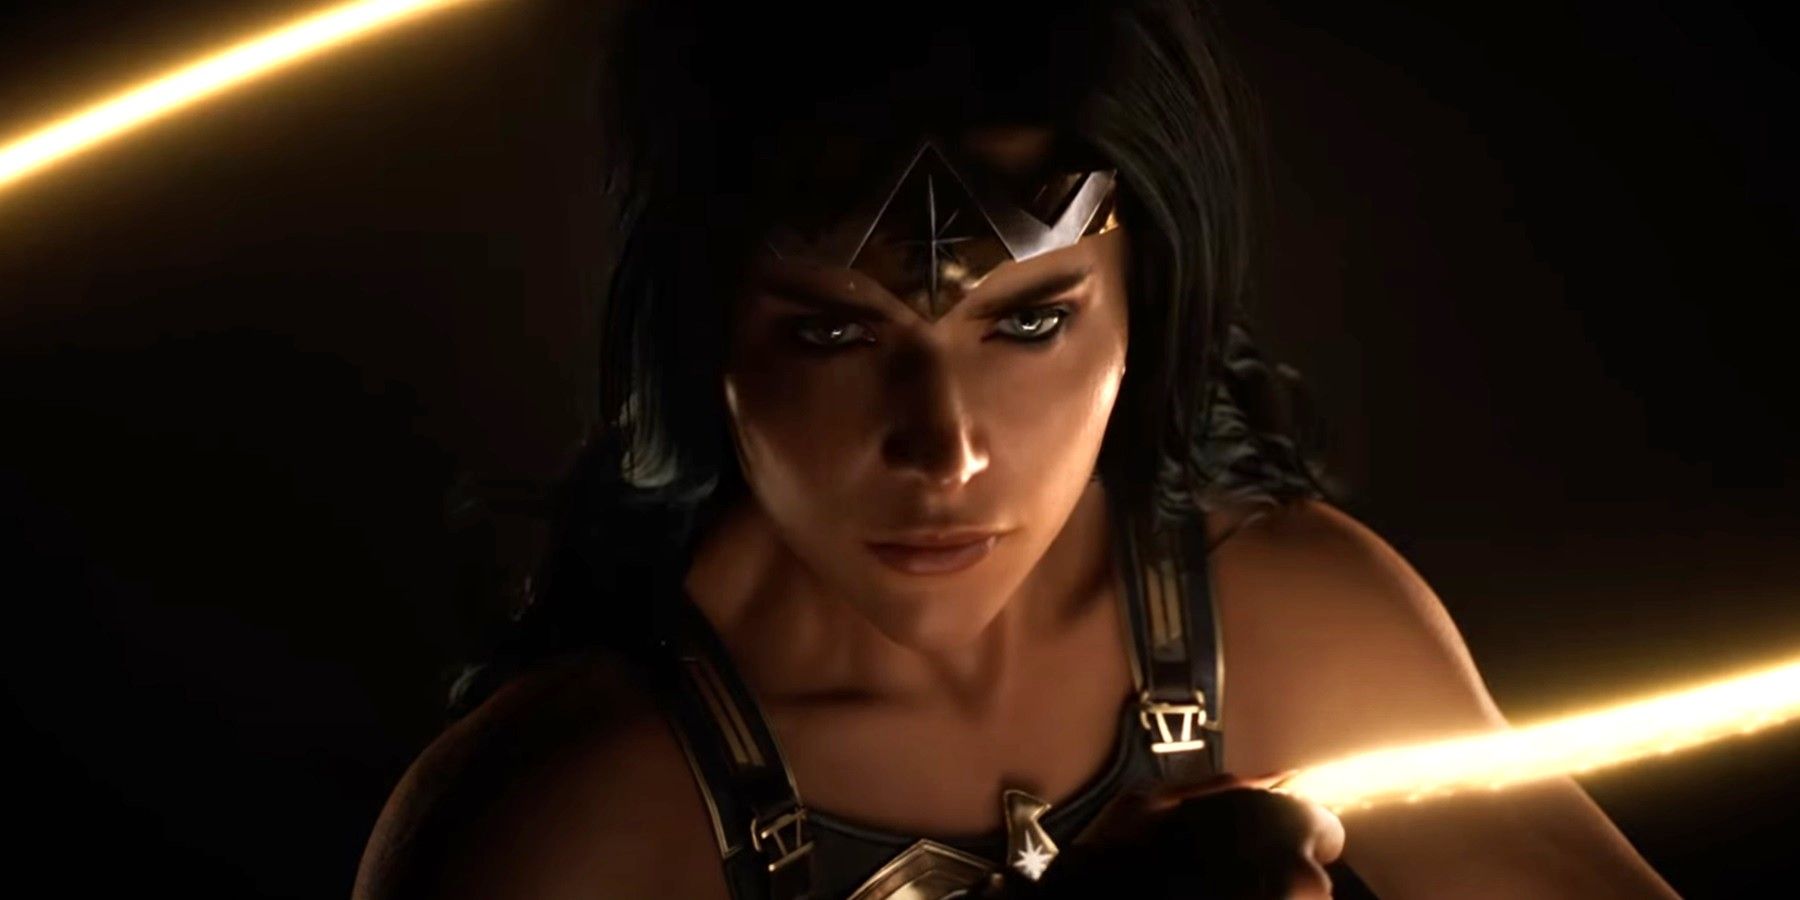 Discussion] Any news on the Wonder Woman game? It's been almost